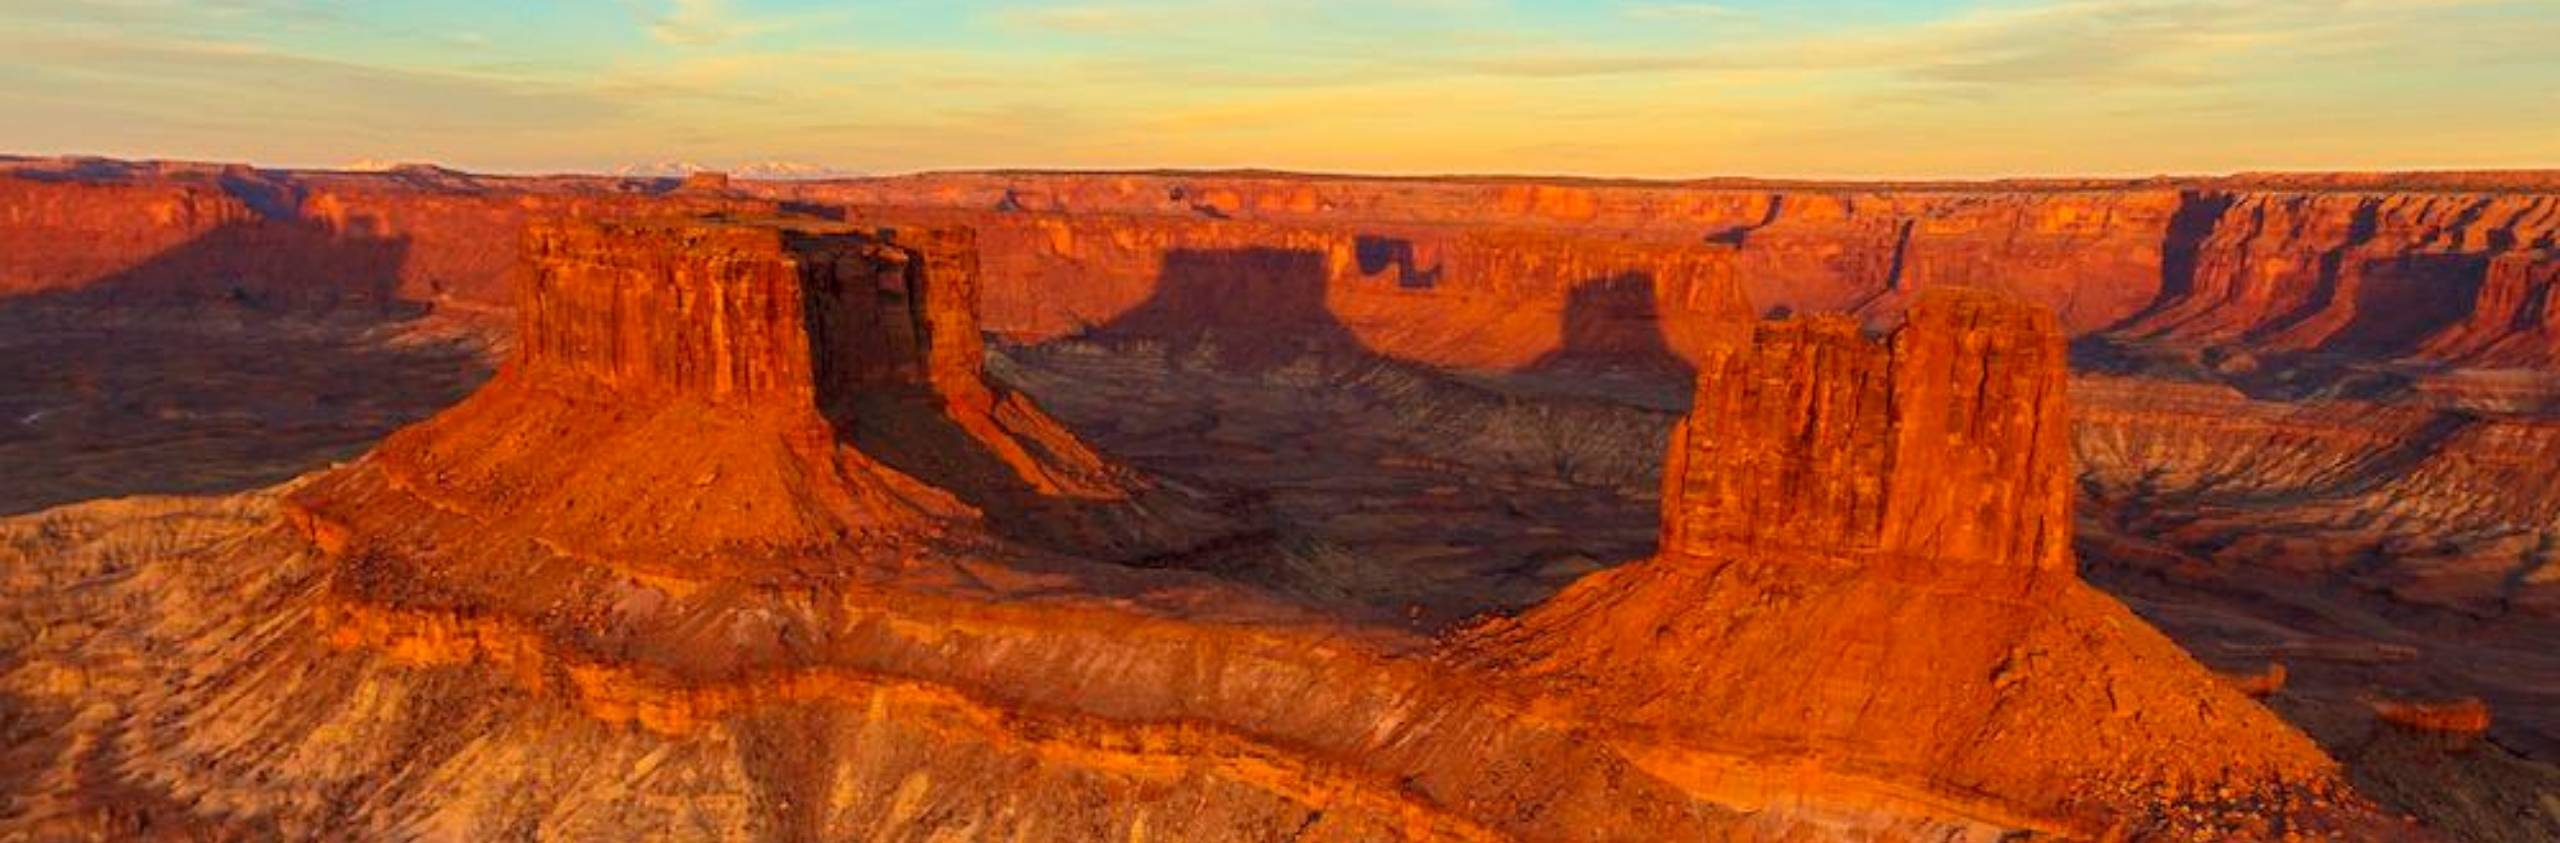 canyonlands glowing red and orange at sunset